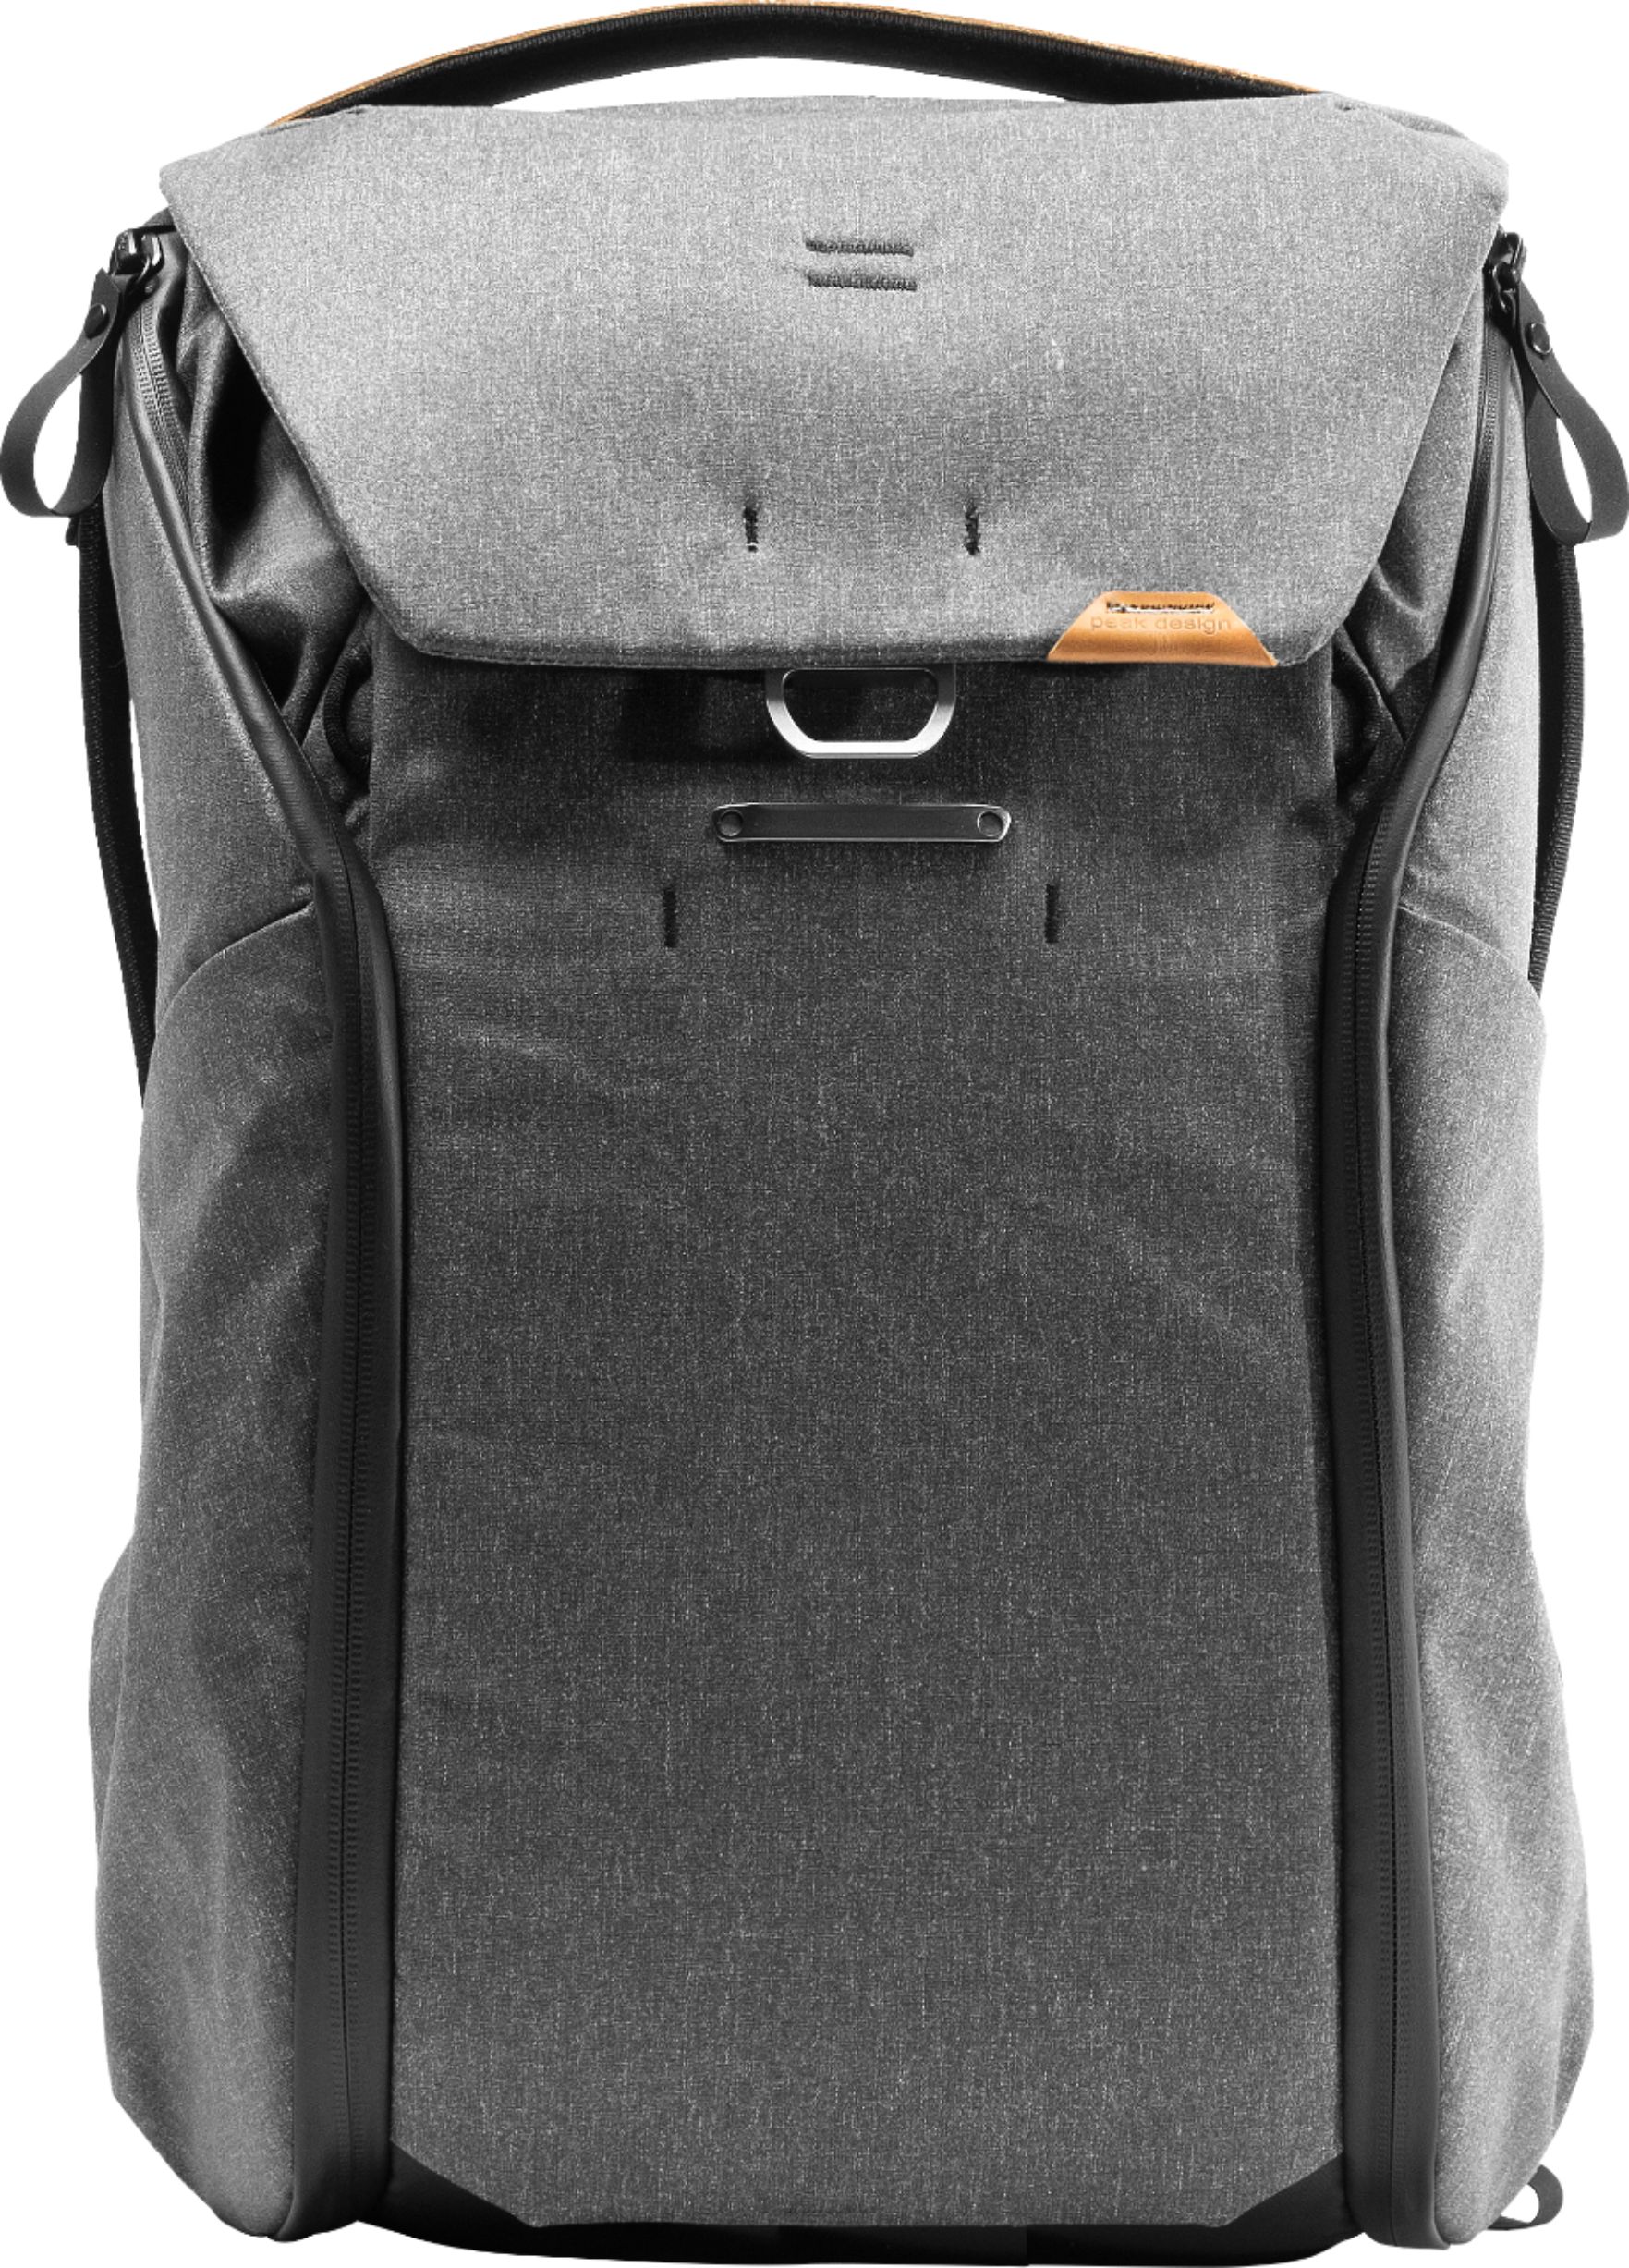 social table About setting Peak Design Everyday Backpack V2 30L Charcoal BEDB-30-CH-2 - Best Buy